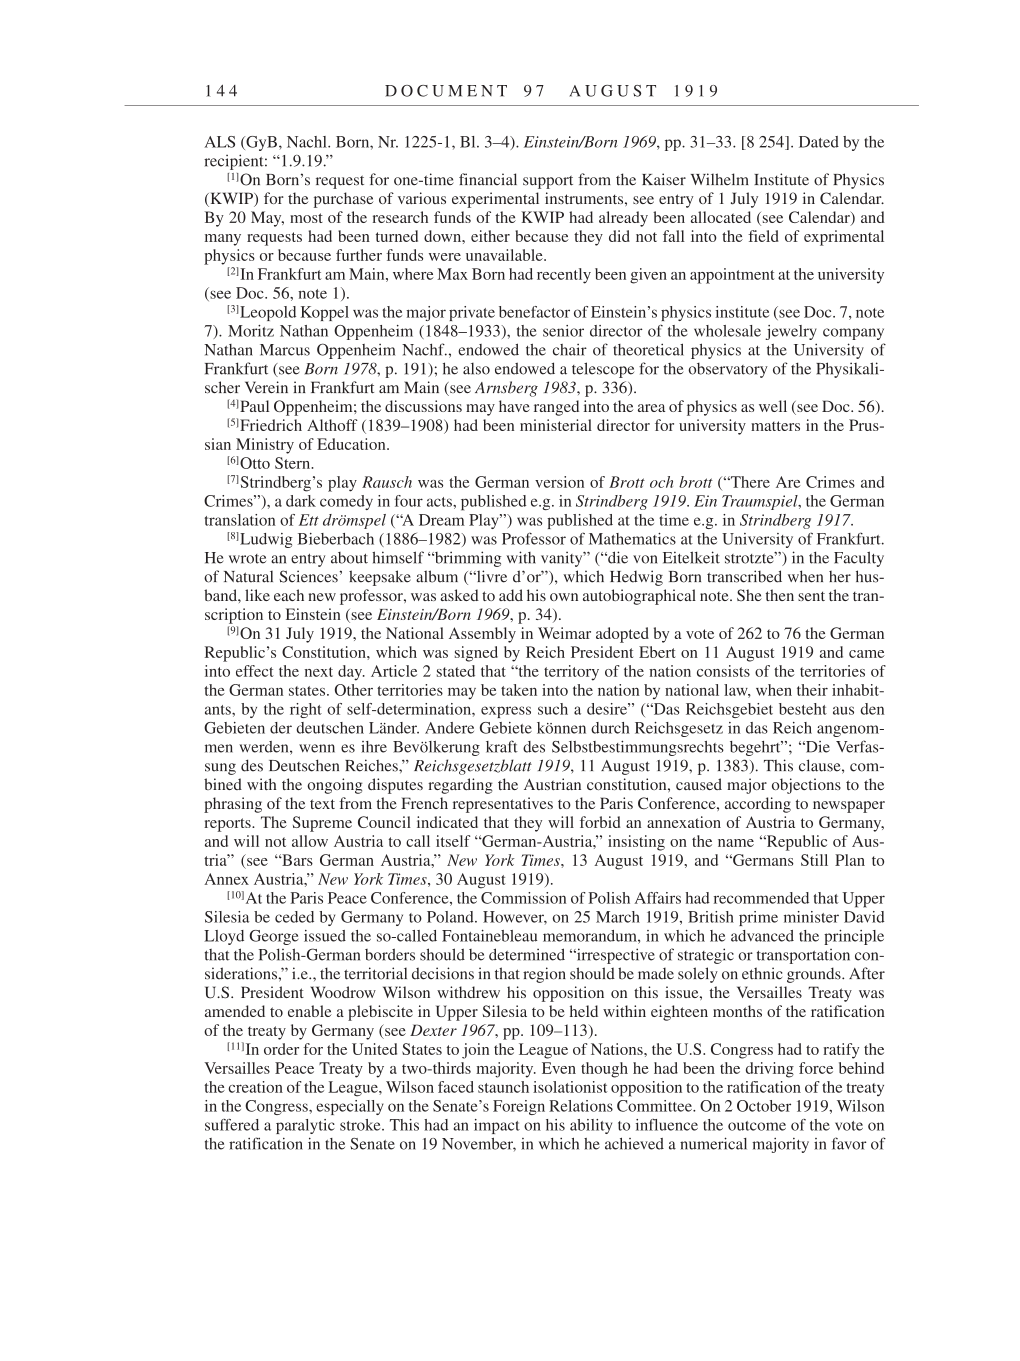 Volume 9: The Berlin Years: Correspondence January 1919-April 1920 page 144